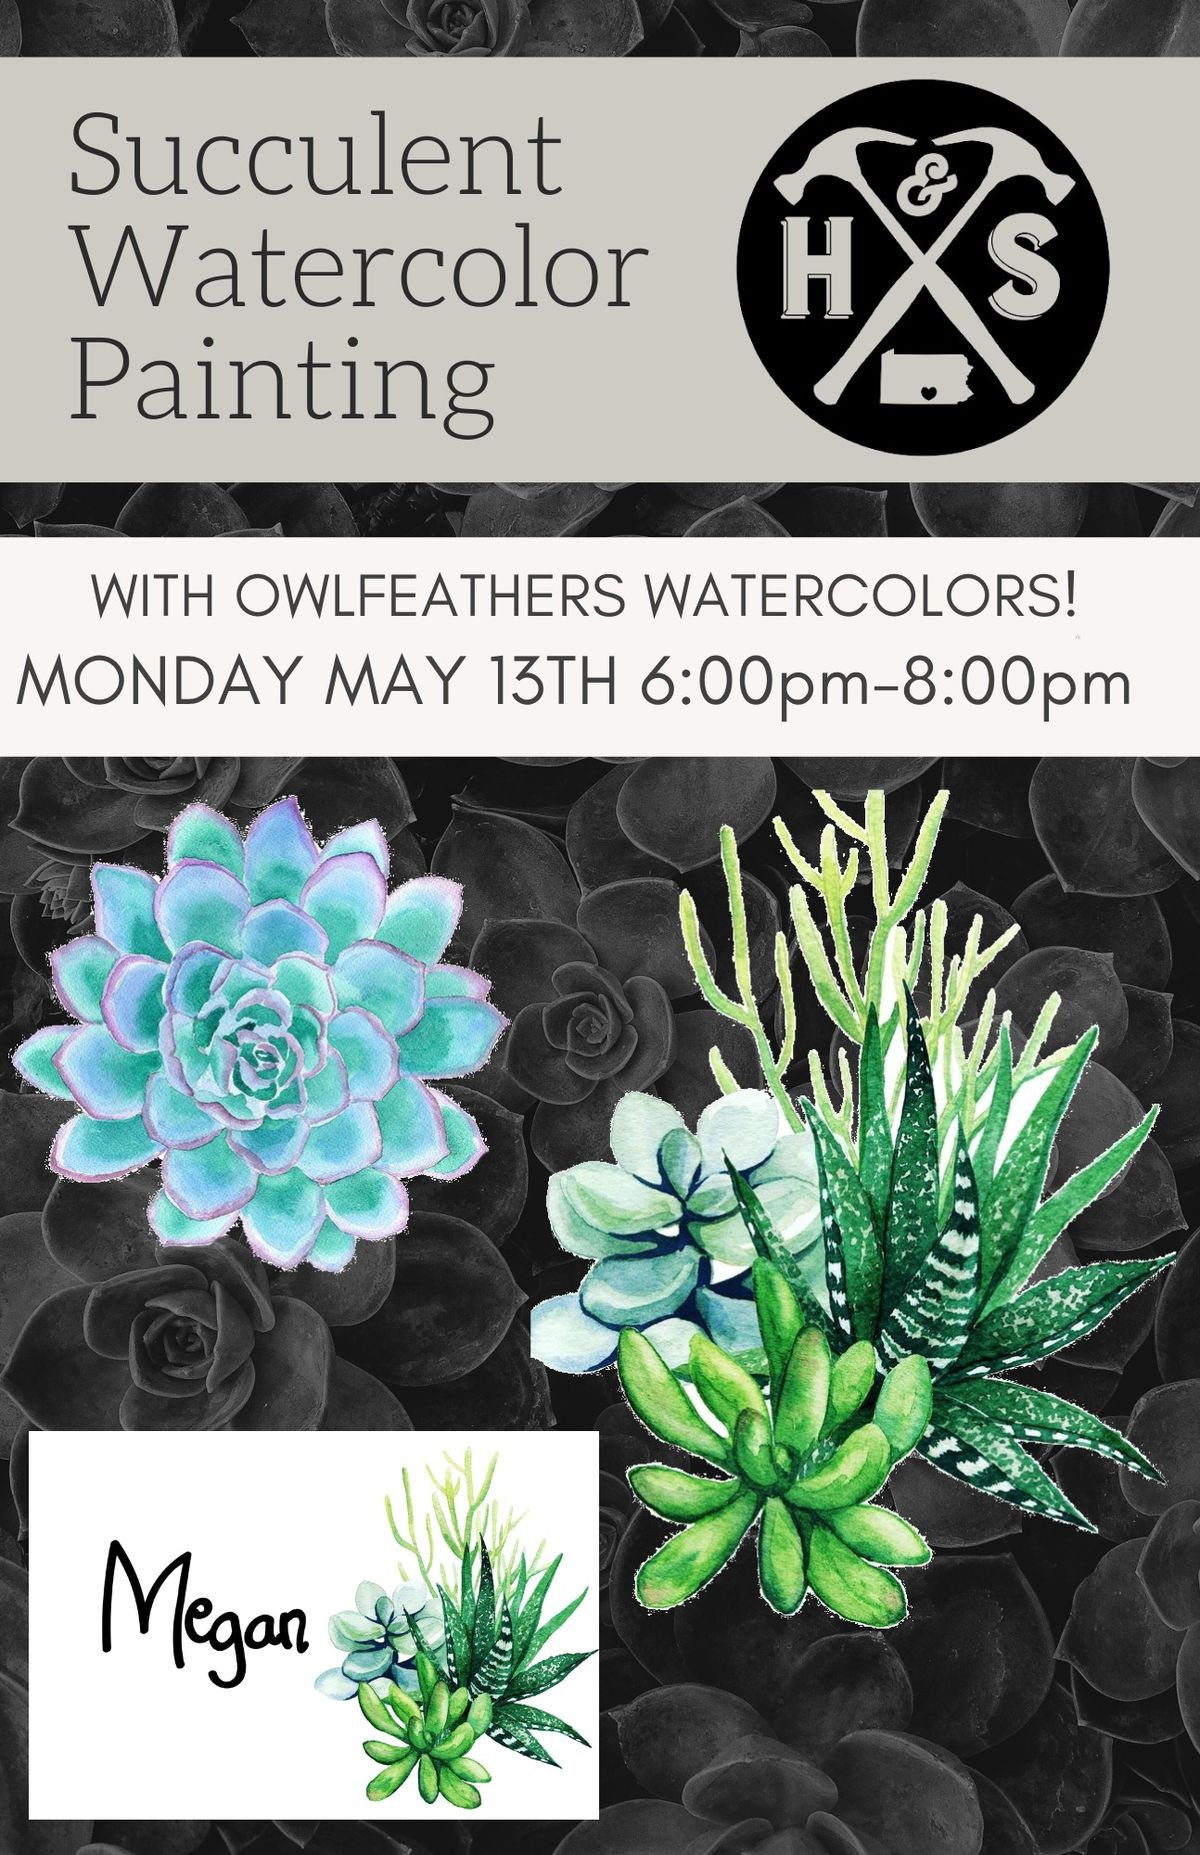 Monday May 13th- Succulent Watercolor Painting Workshop with Owlfeathers Watercolors! 6pm